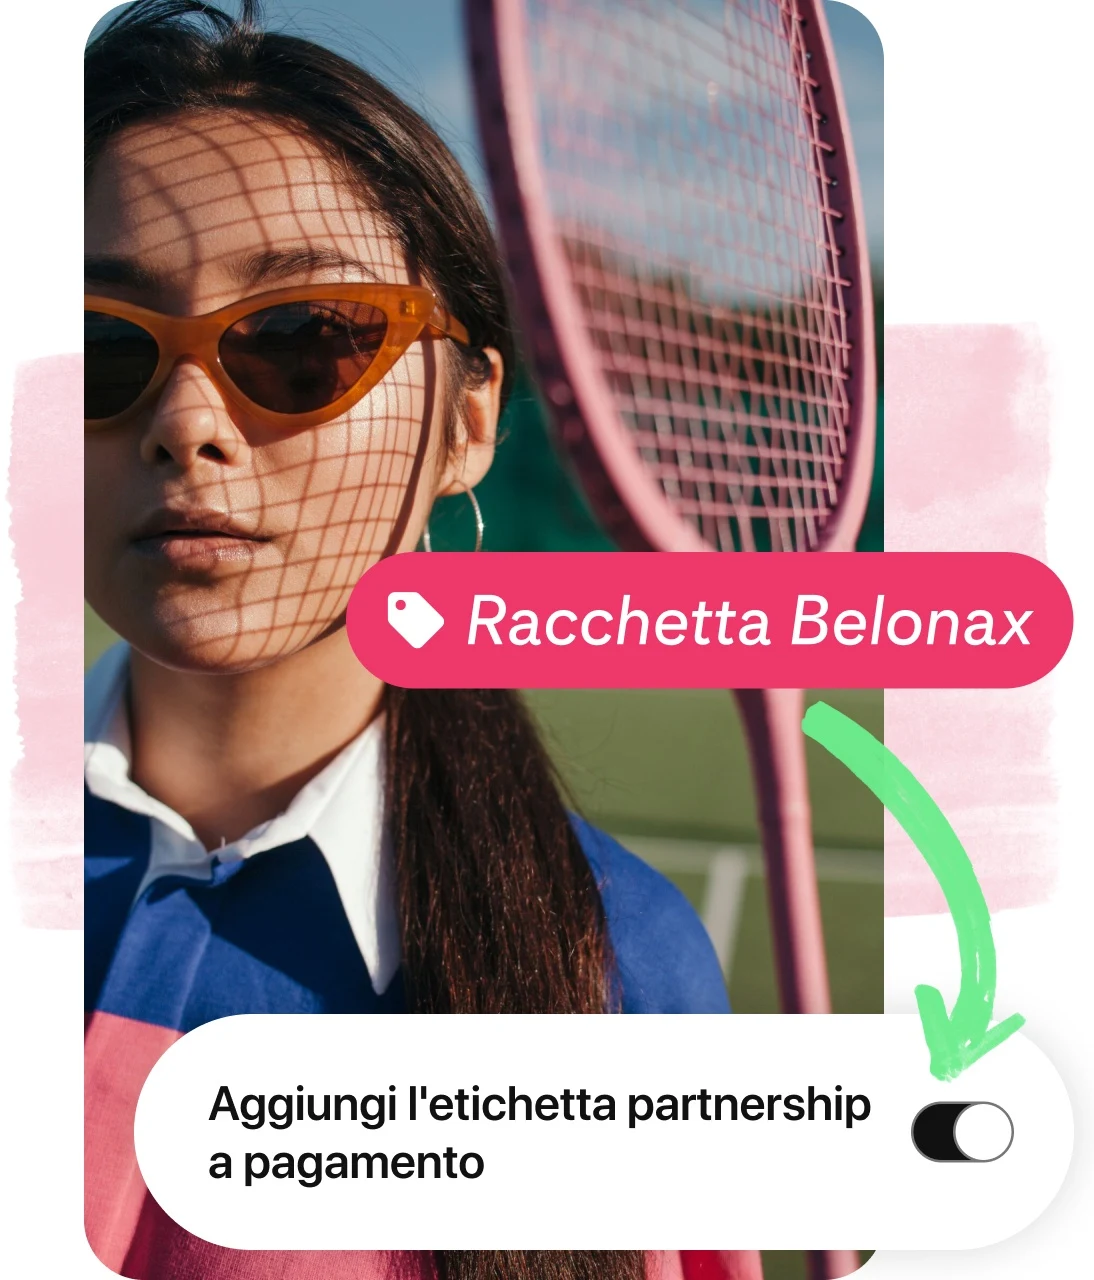 Pin collage, showing woman wearing sunglasses holding a tennis racket, a product tag and button to disclose brand partnership.